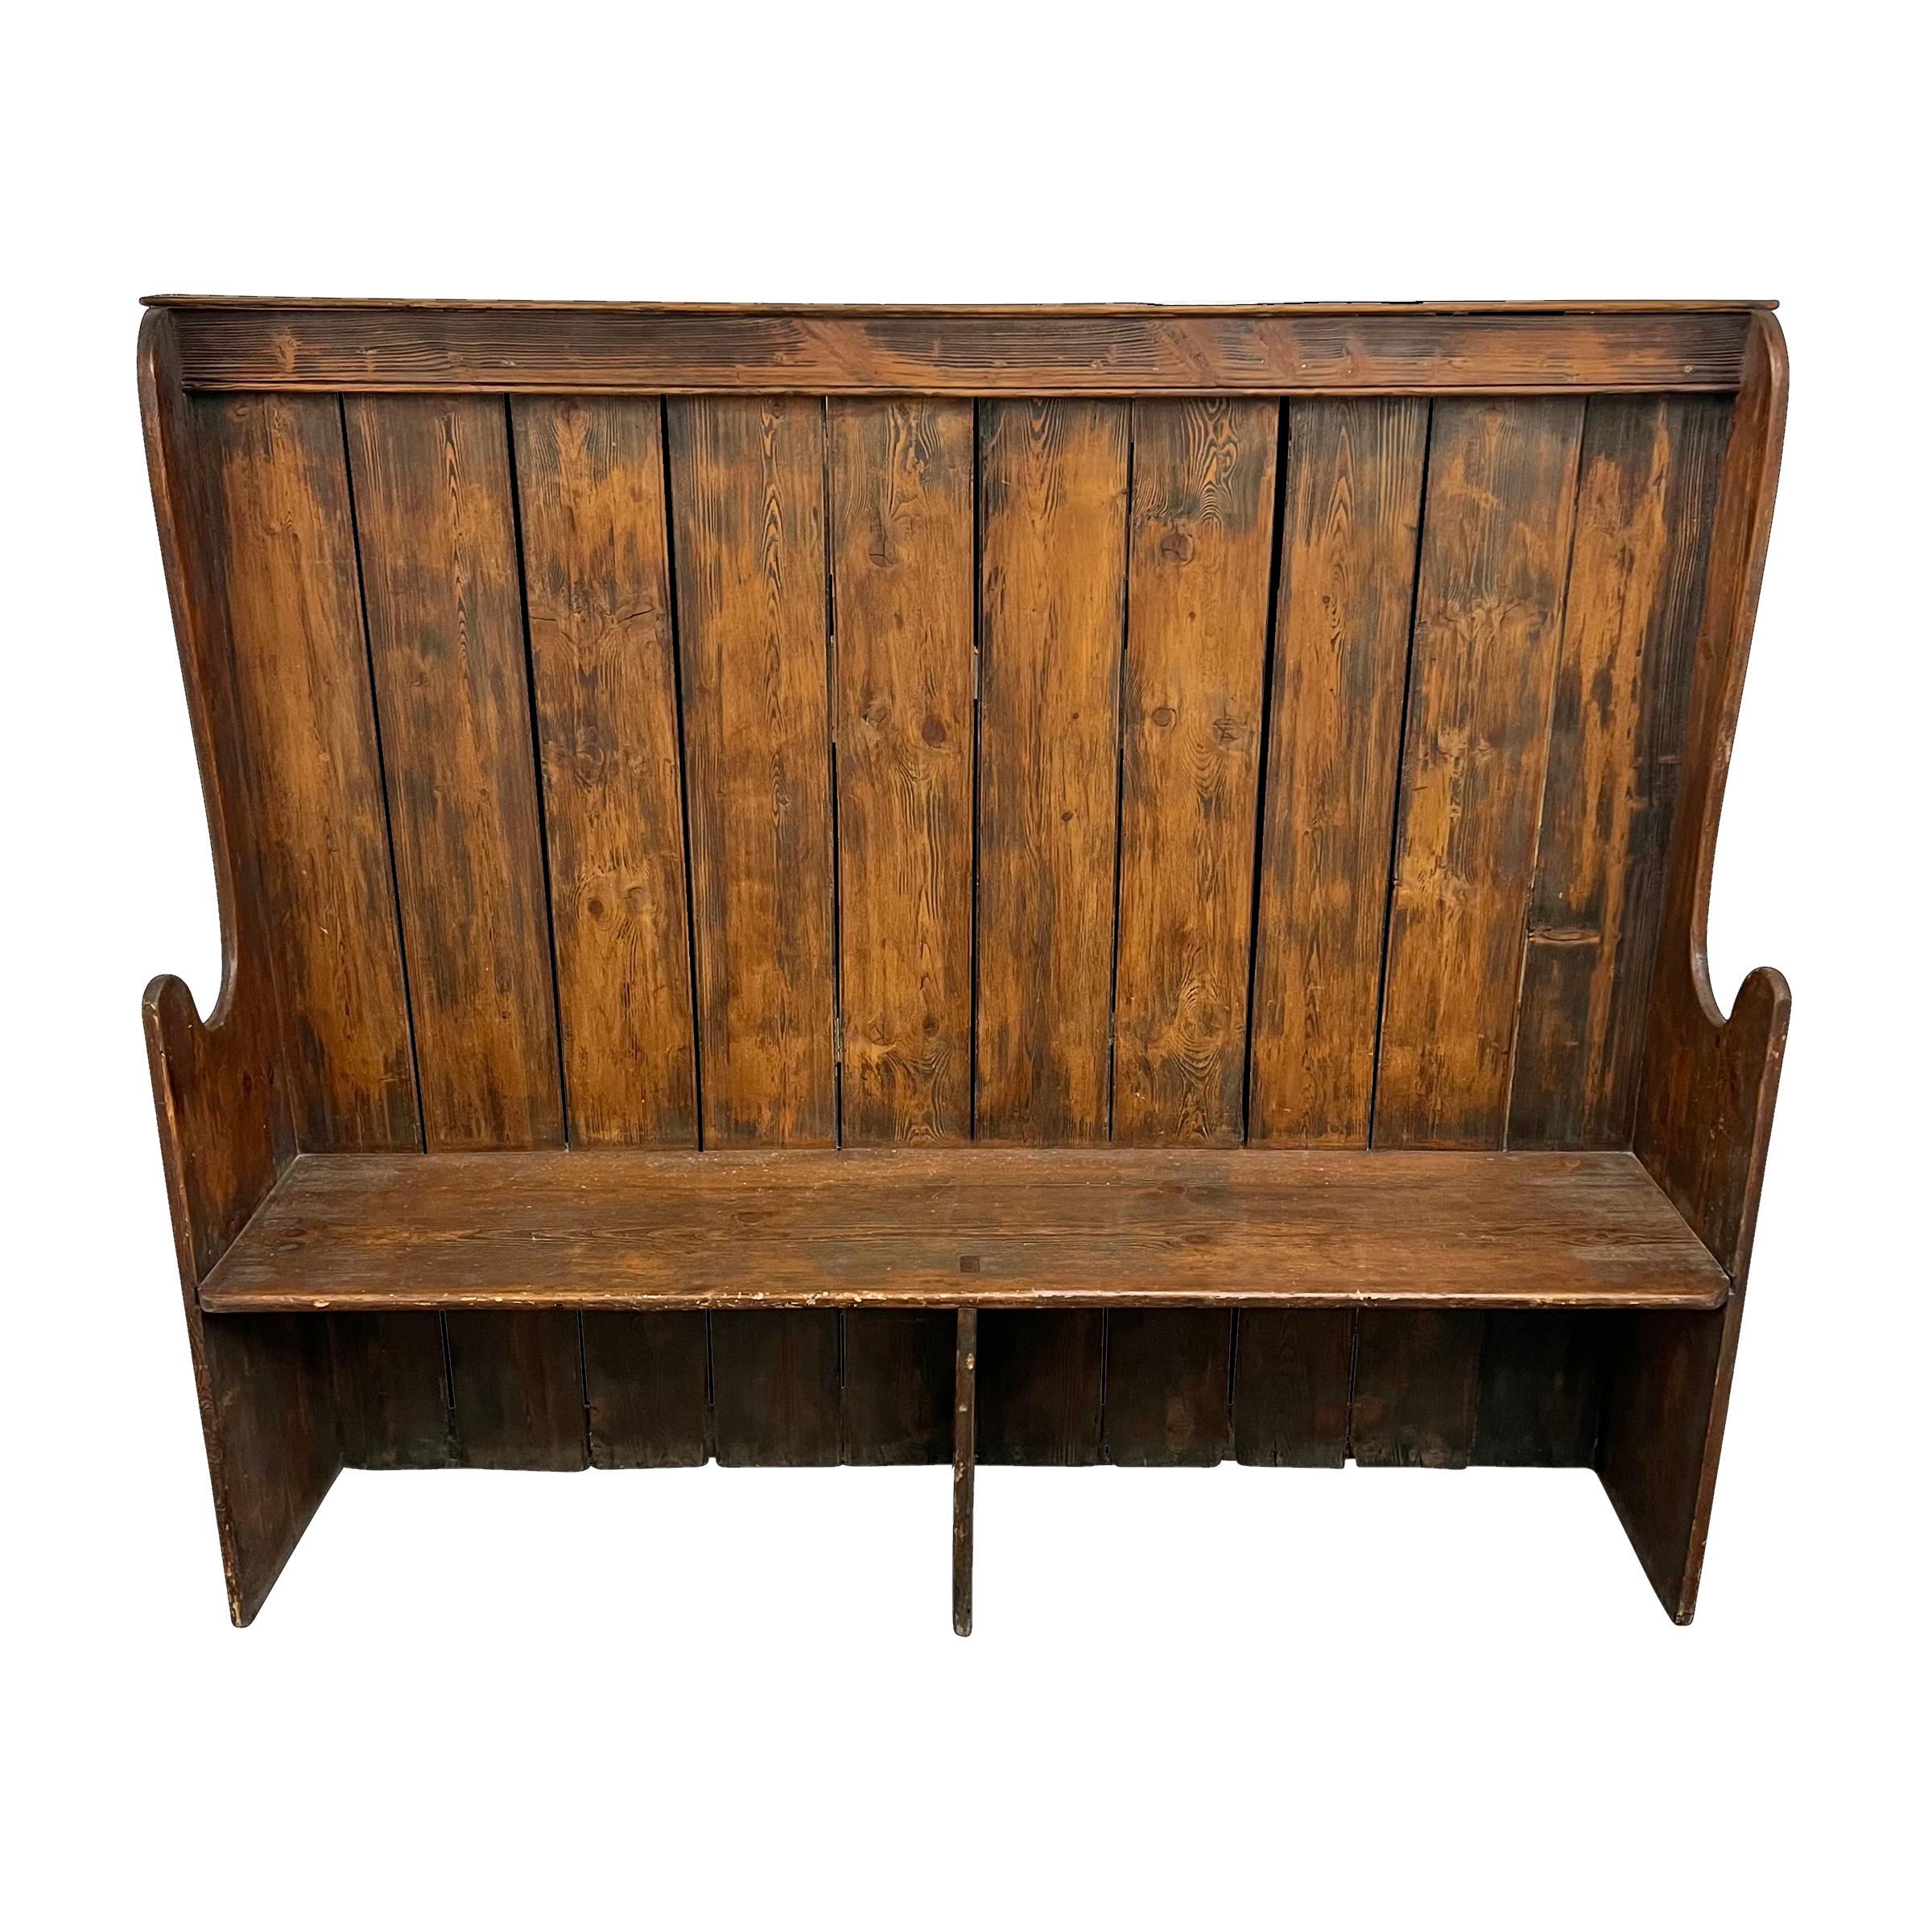 Country 19th Century English Pine Settle